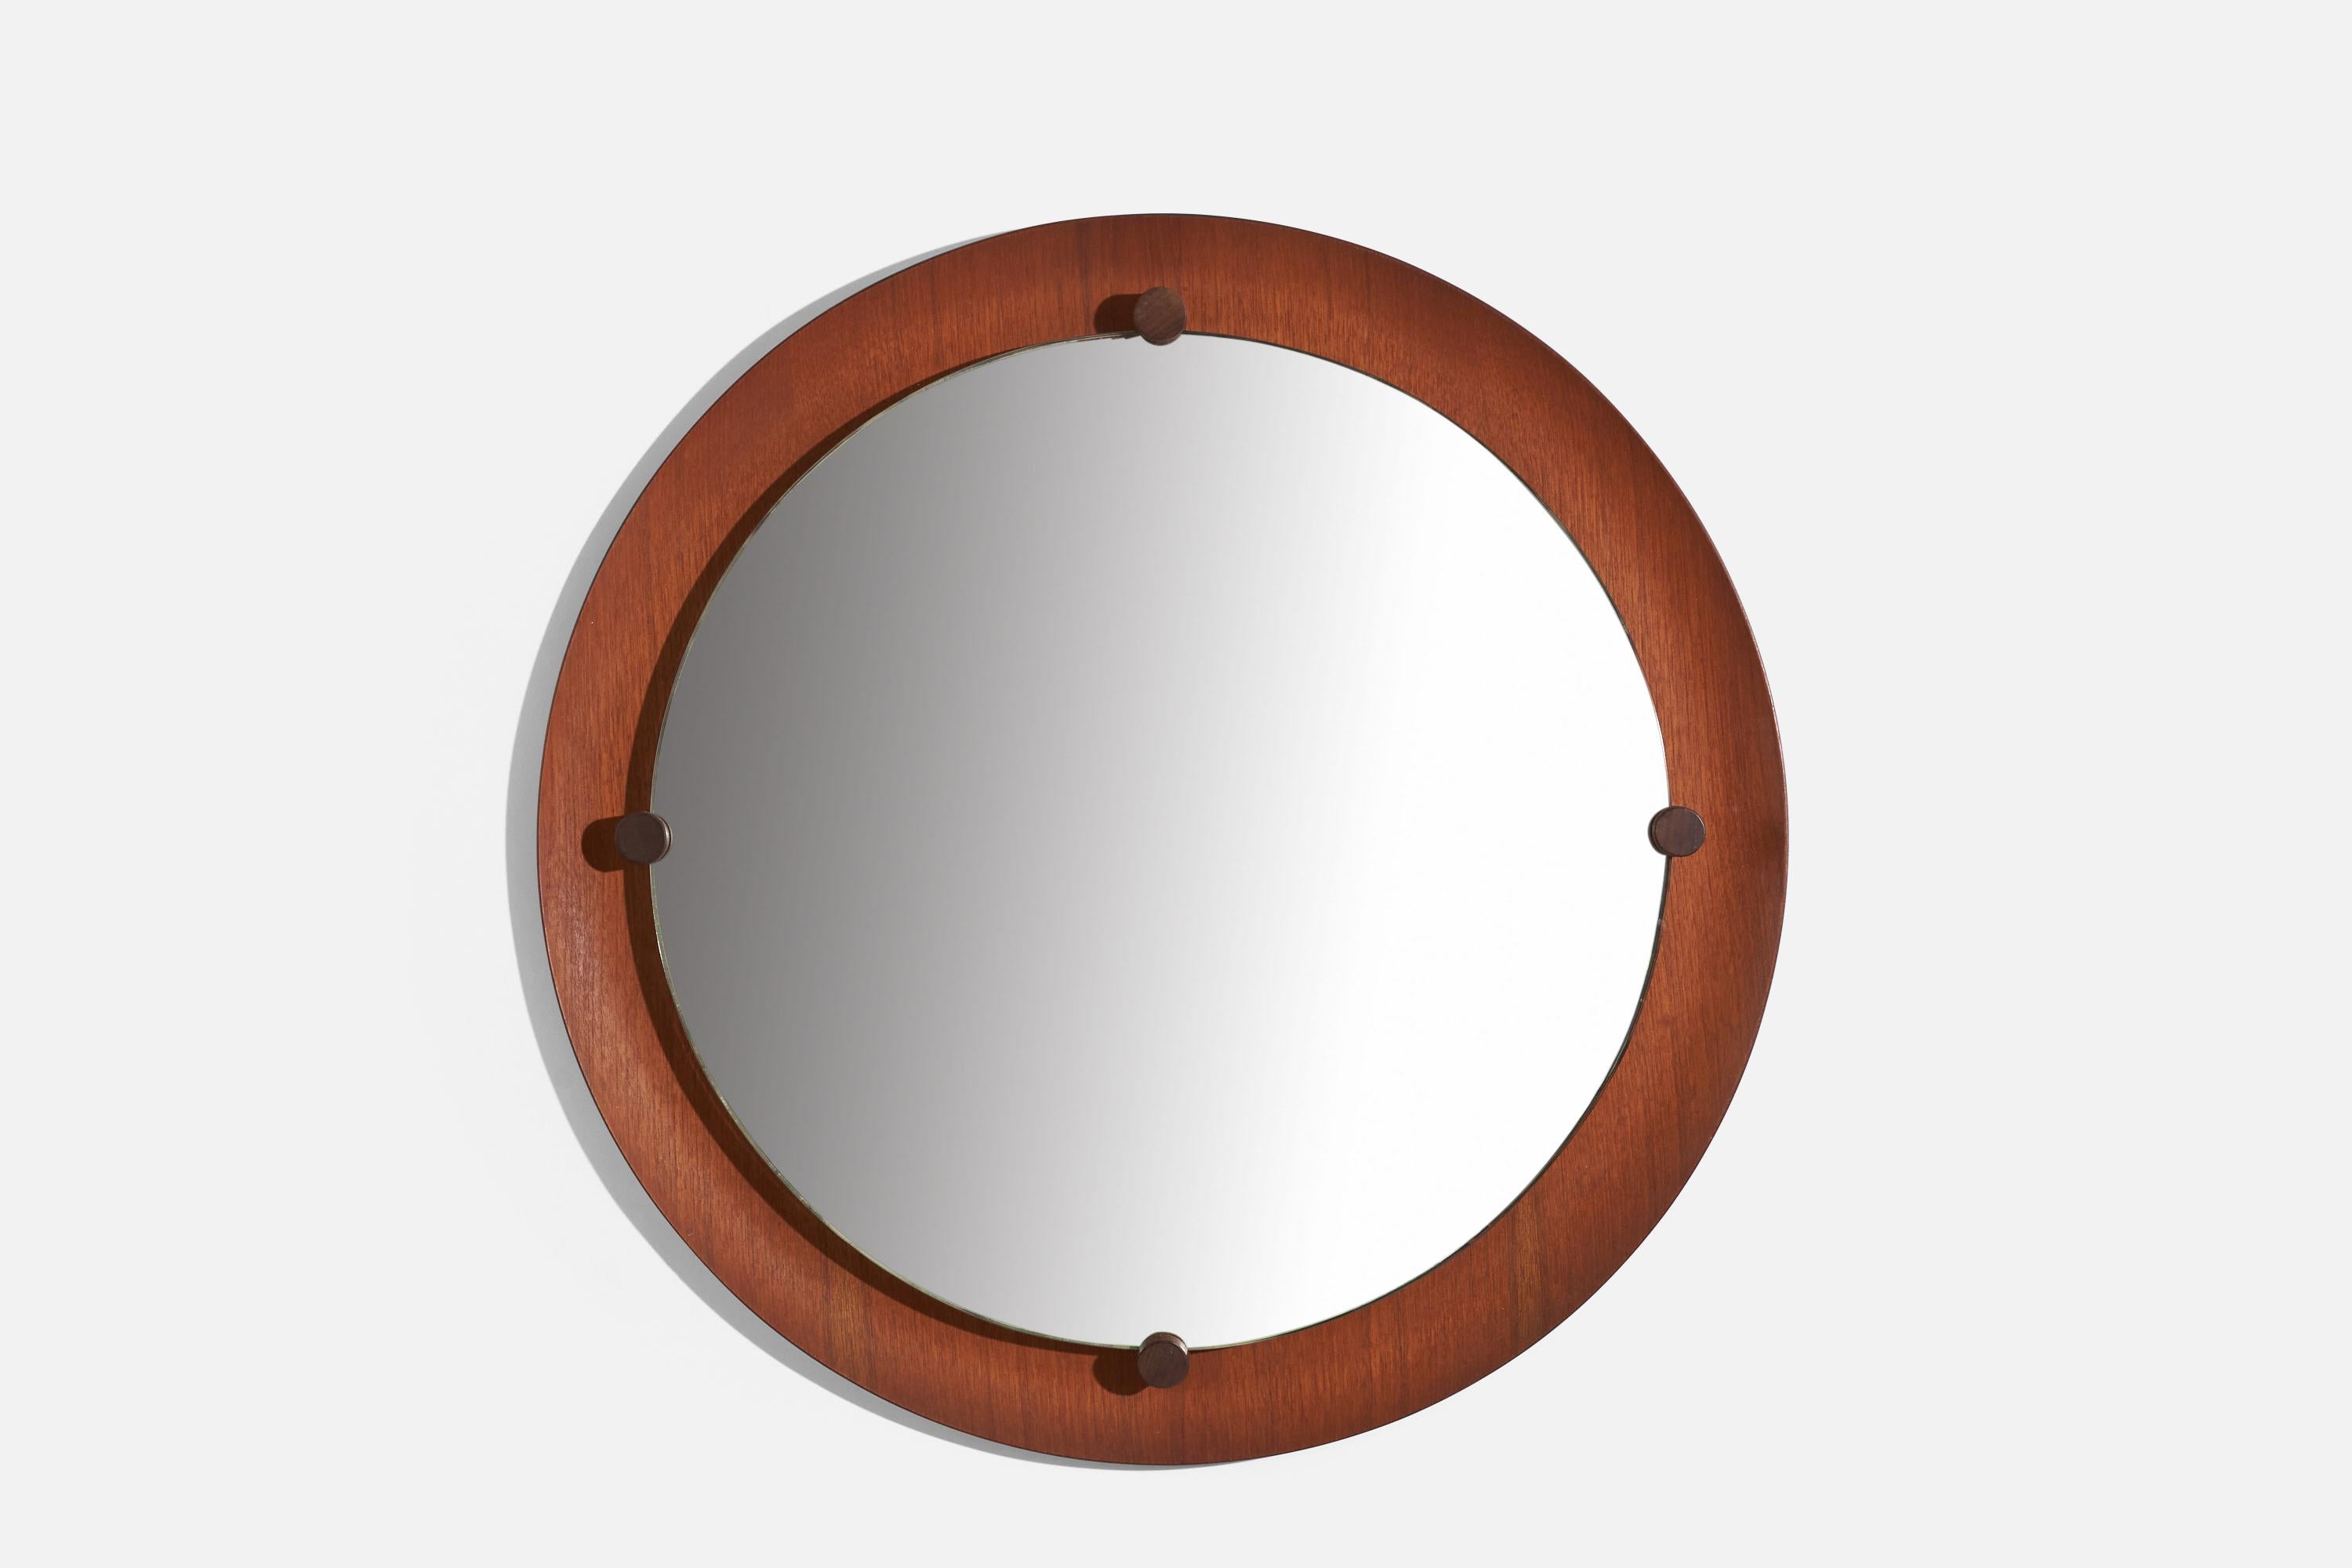 A brass and teak wall mirror design attributed to Franco Campo and Carlo Graffi, presumably manufactured by Home, Italy, 1950s-1960s.
 